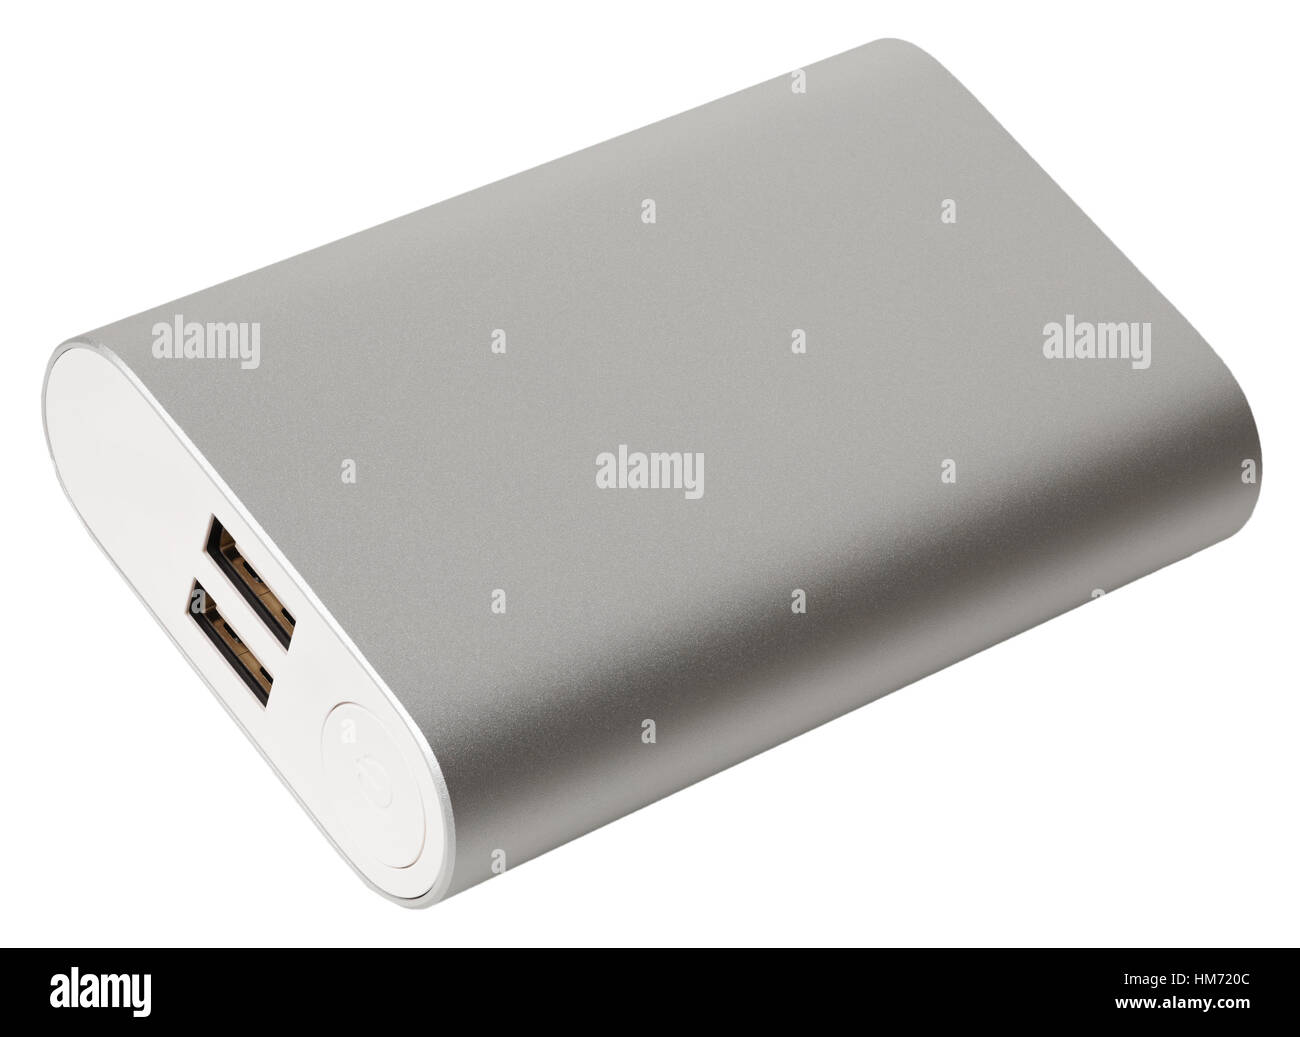 Silver power bank for mobile device with two usb ports isolated on white background Stock Photo